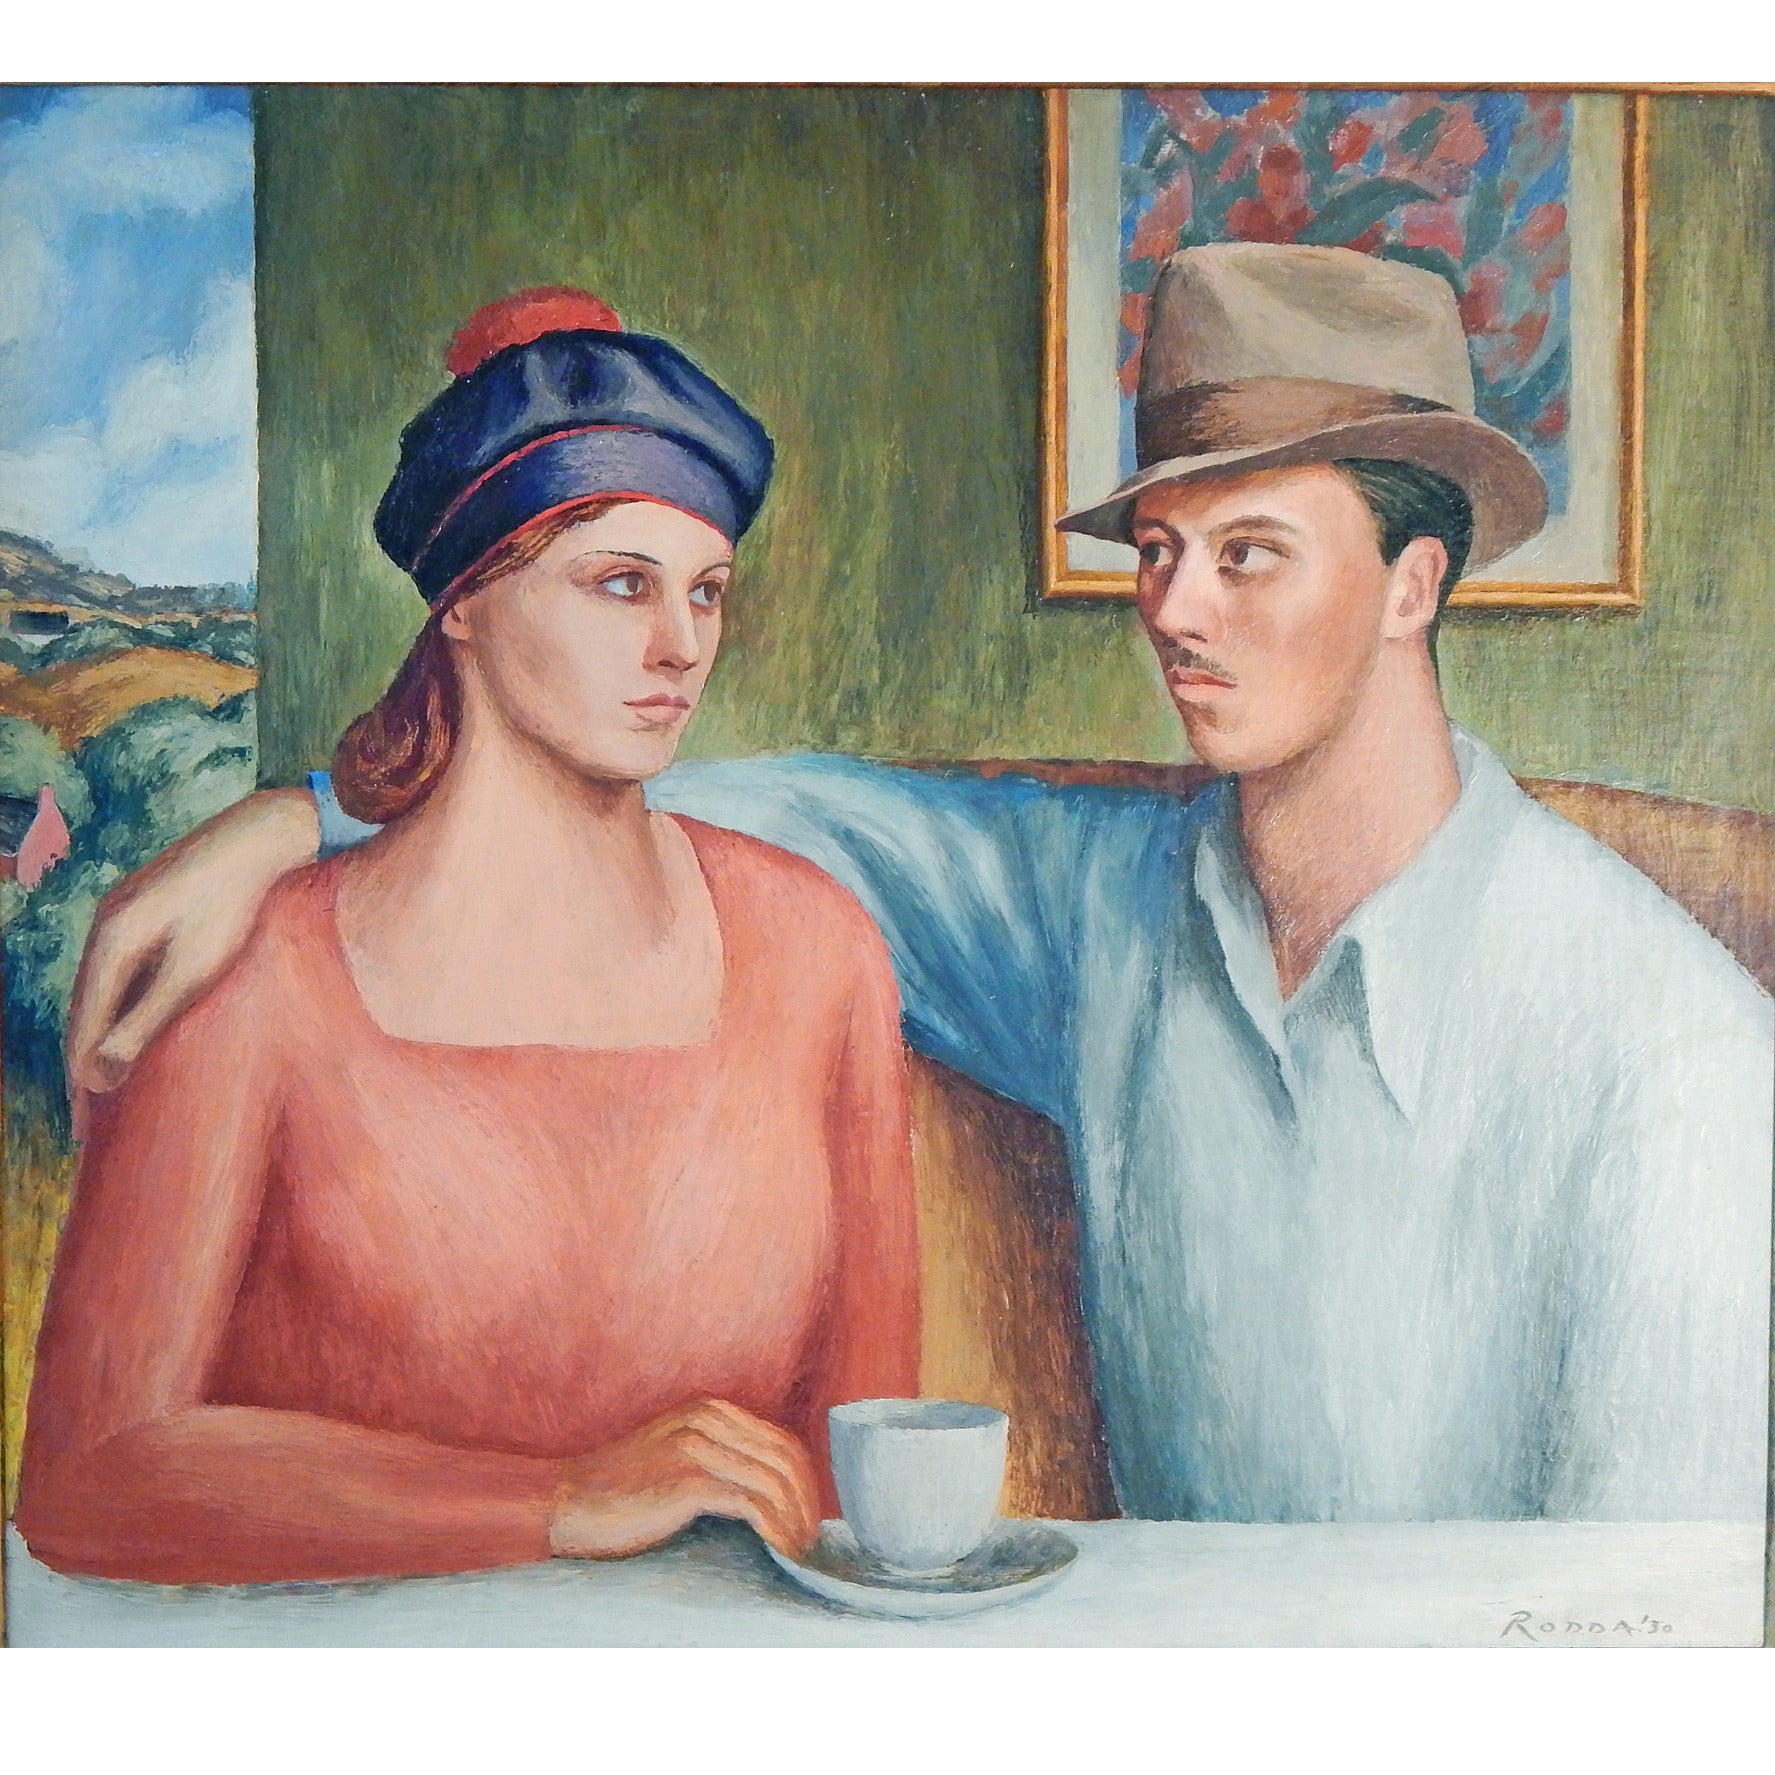 "Sipping Coffee, " Social Realist Painting by Rodda, 1930